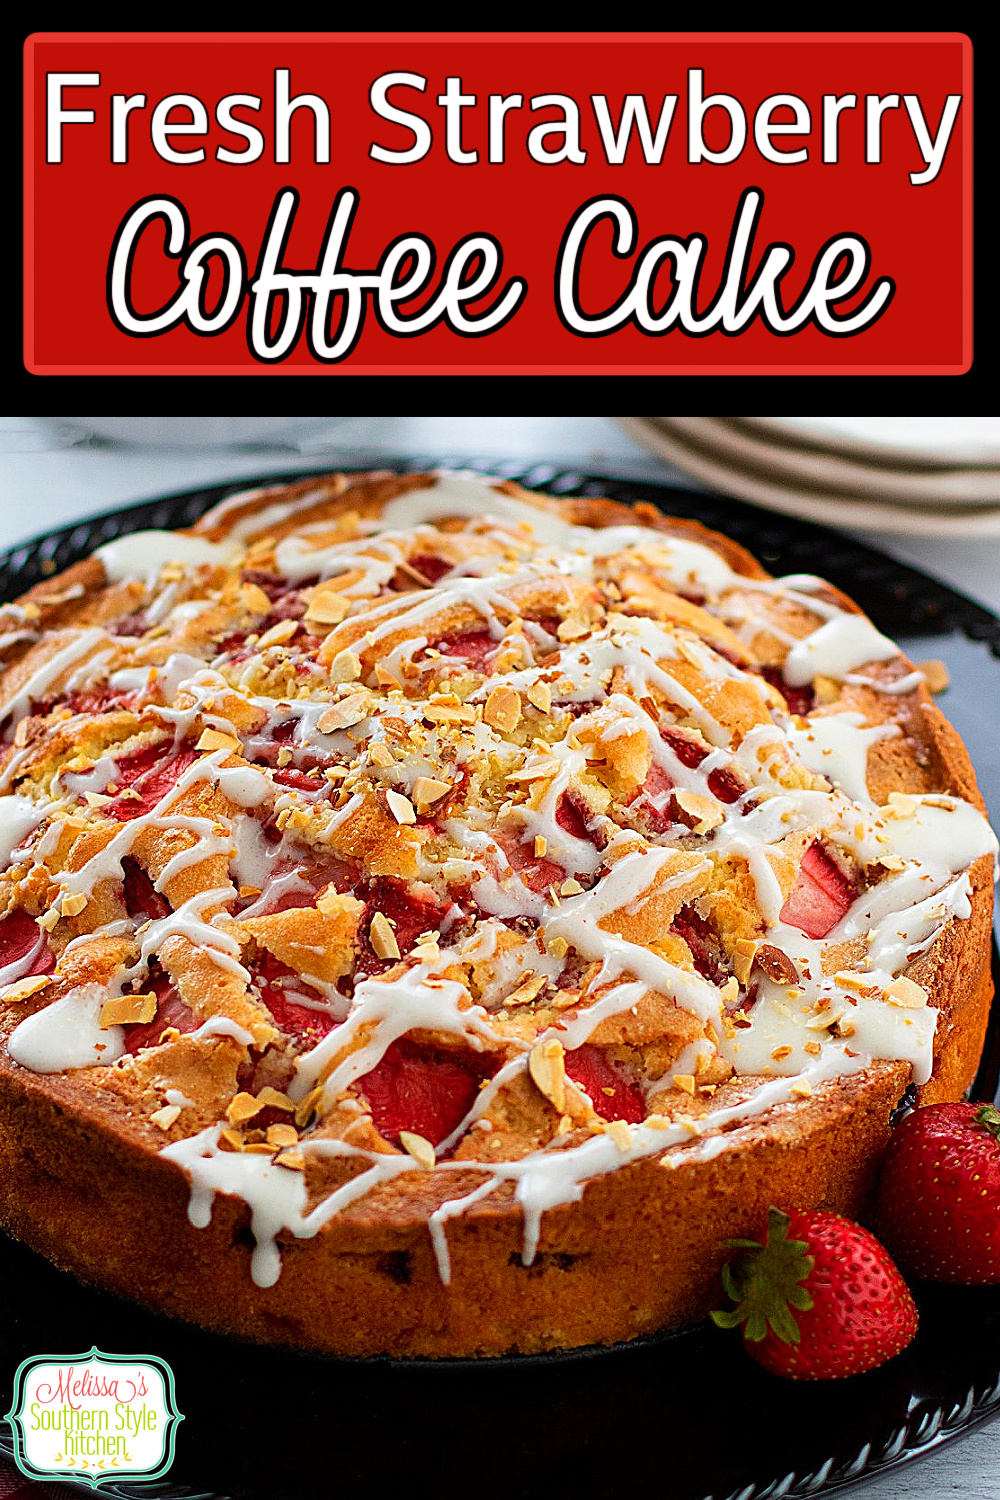 This Fresh Strawberry Coffee Cake features slices of sweet strawberries baked in a scratch made batter and drizzled with a creamy glaze #straberrycoffeecake #strawberries #strawberrycake #strawberryrecipes #strawberries #cakes #cakerecipes via @melissasssk